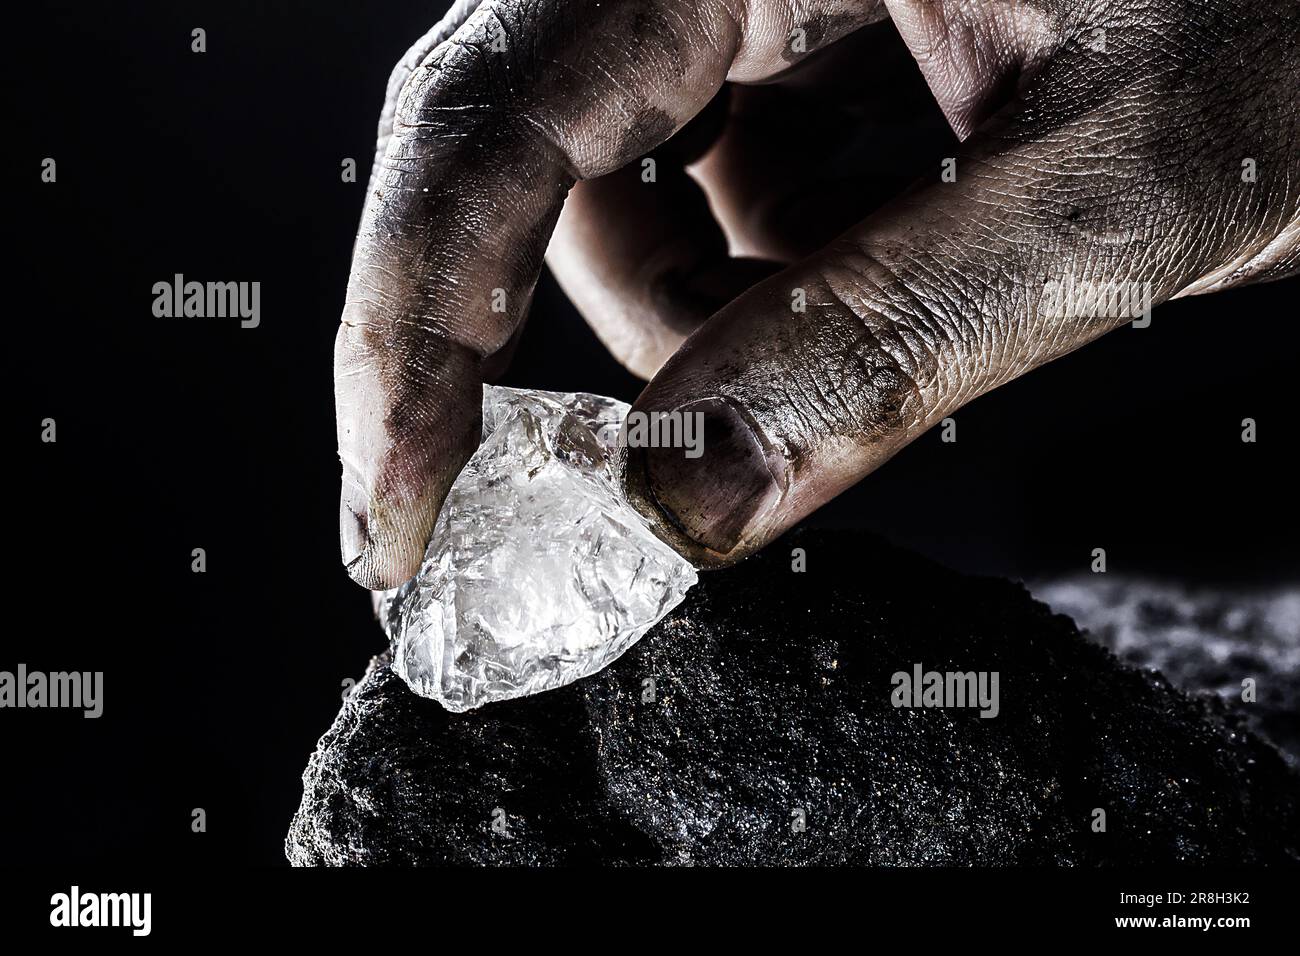 hand removing rare stone from a mine, chinese diamond digging Stock Photo